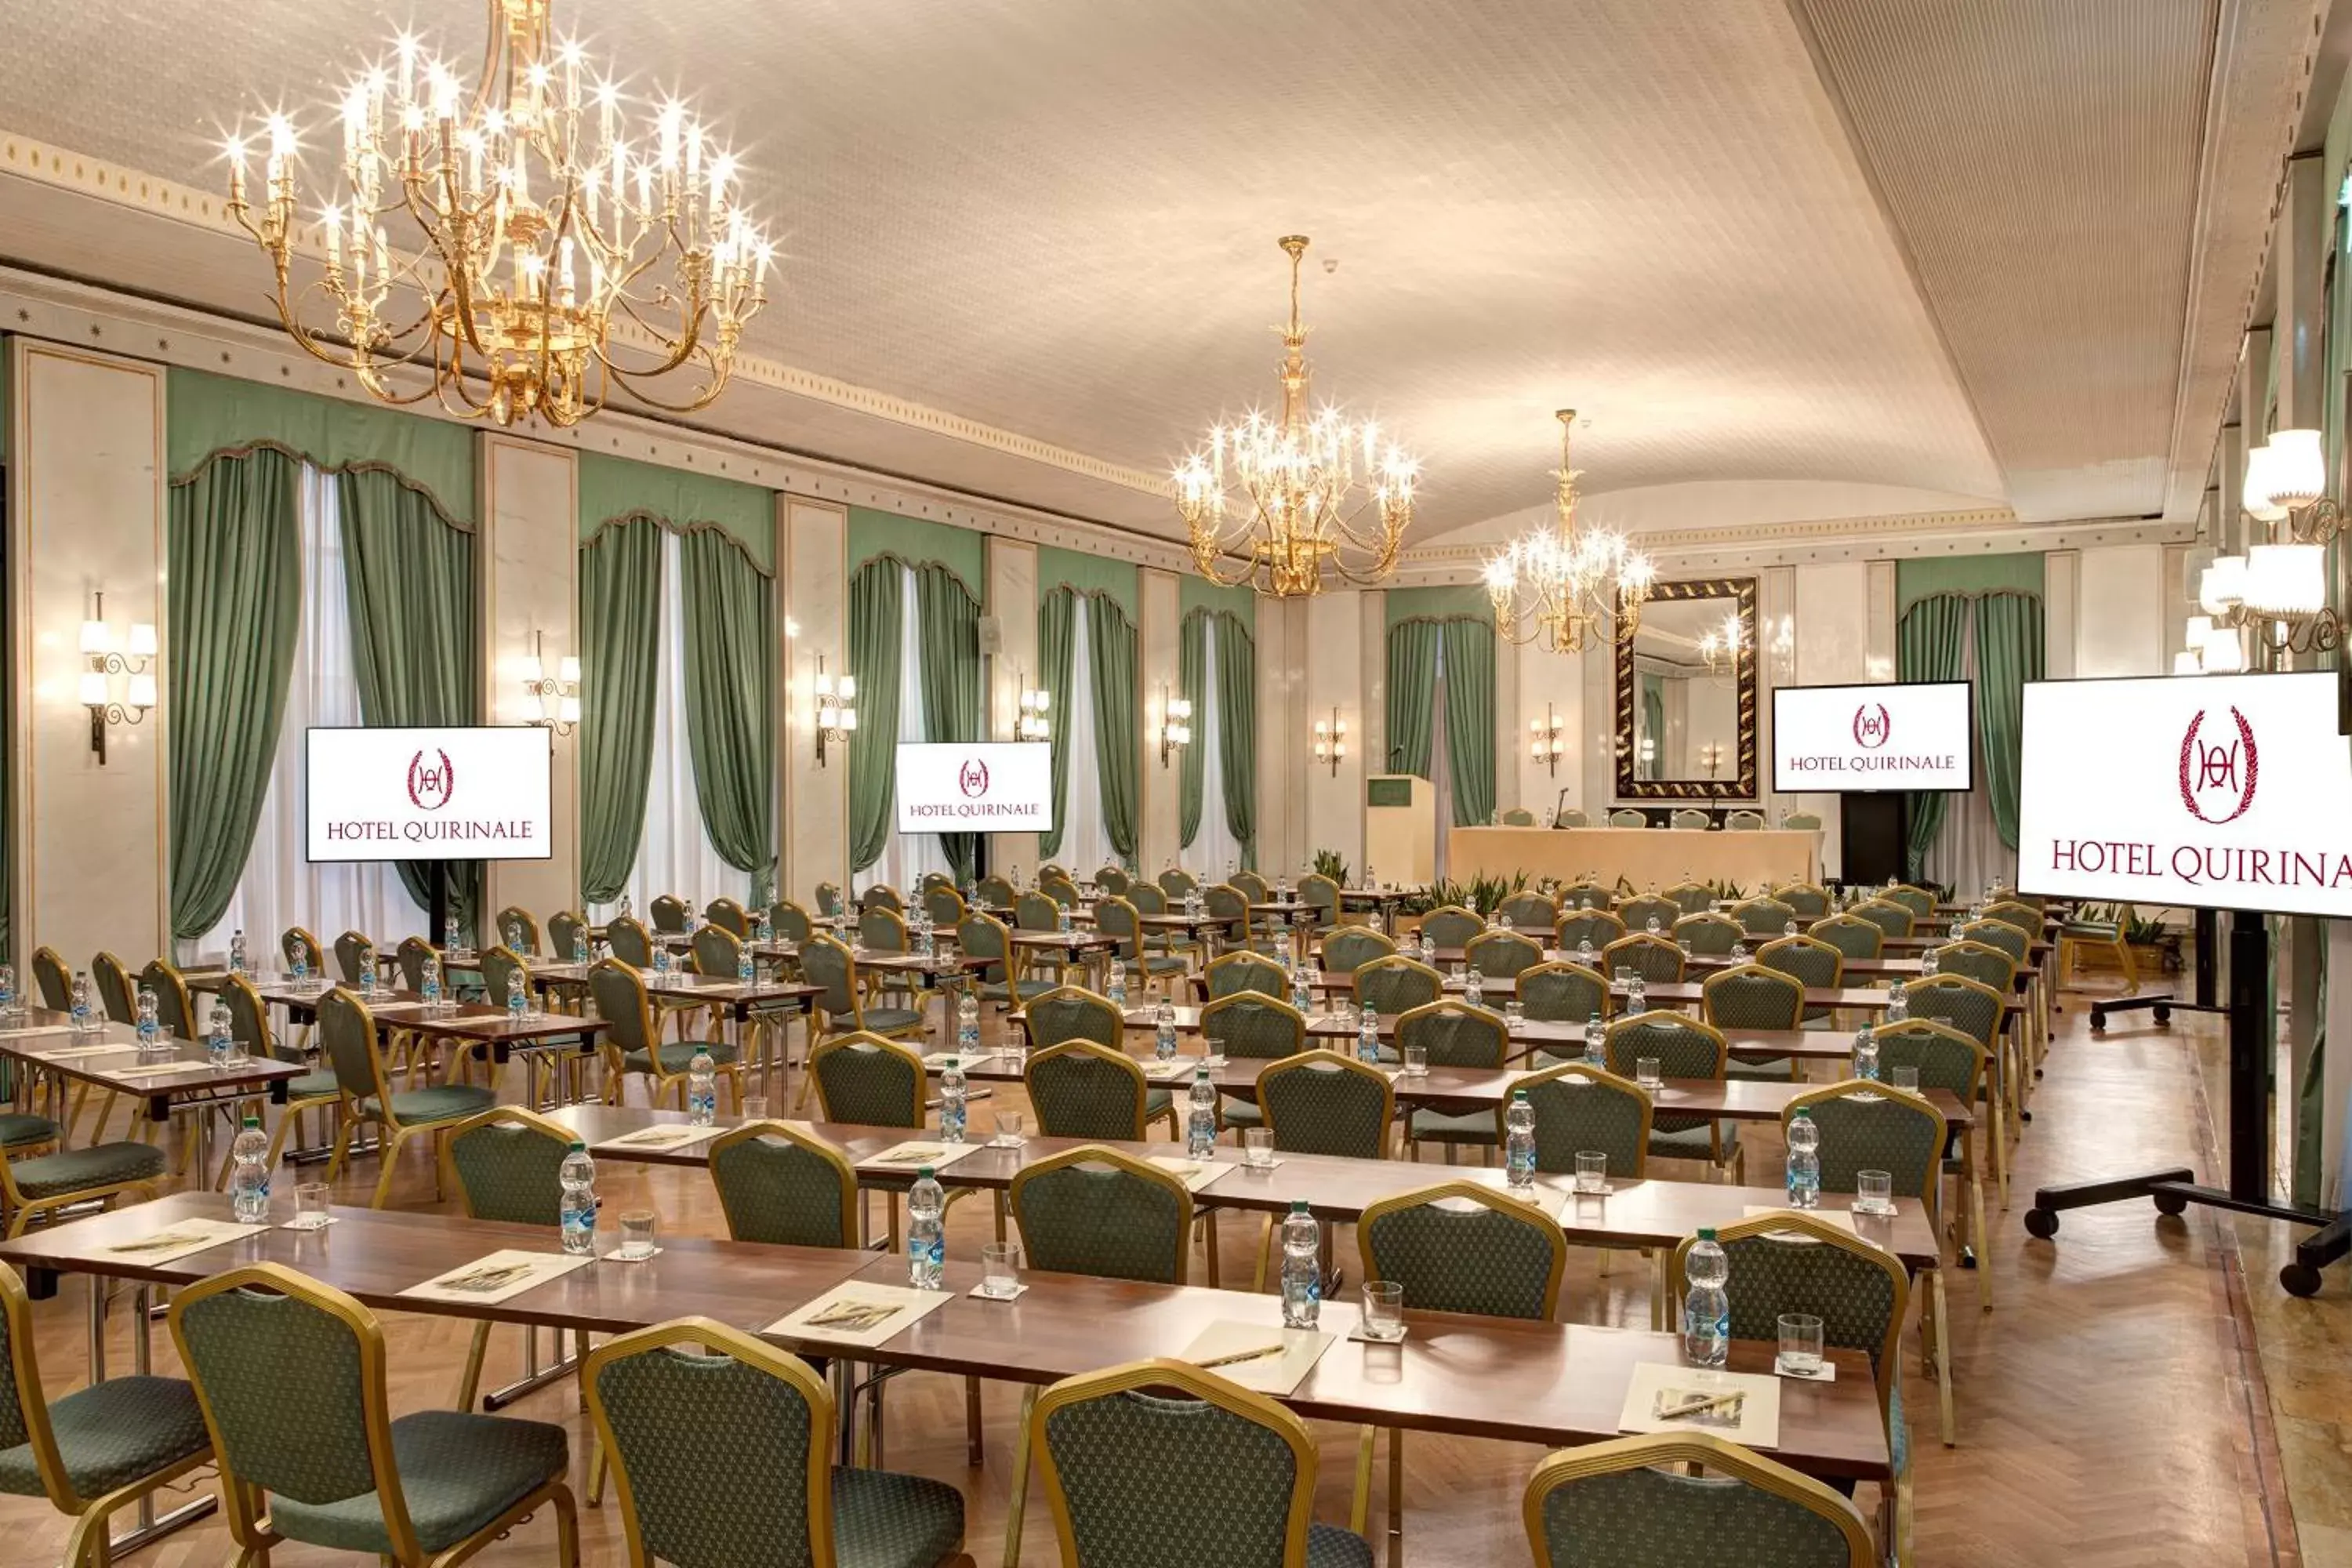 Meeting/conference room, Business Area/Conference Room in Hotel Quirinale